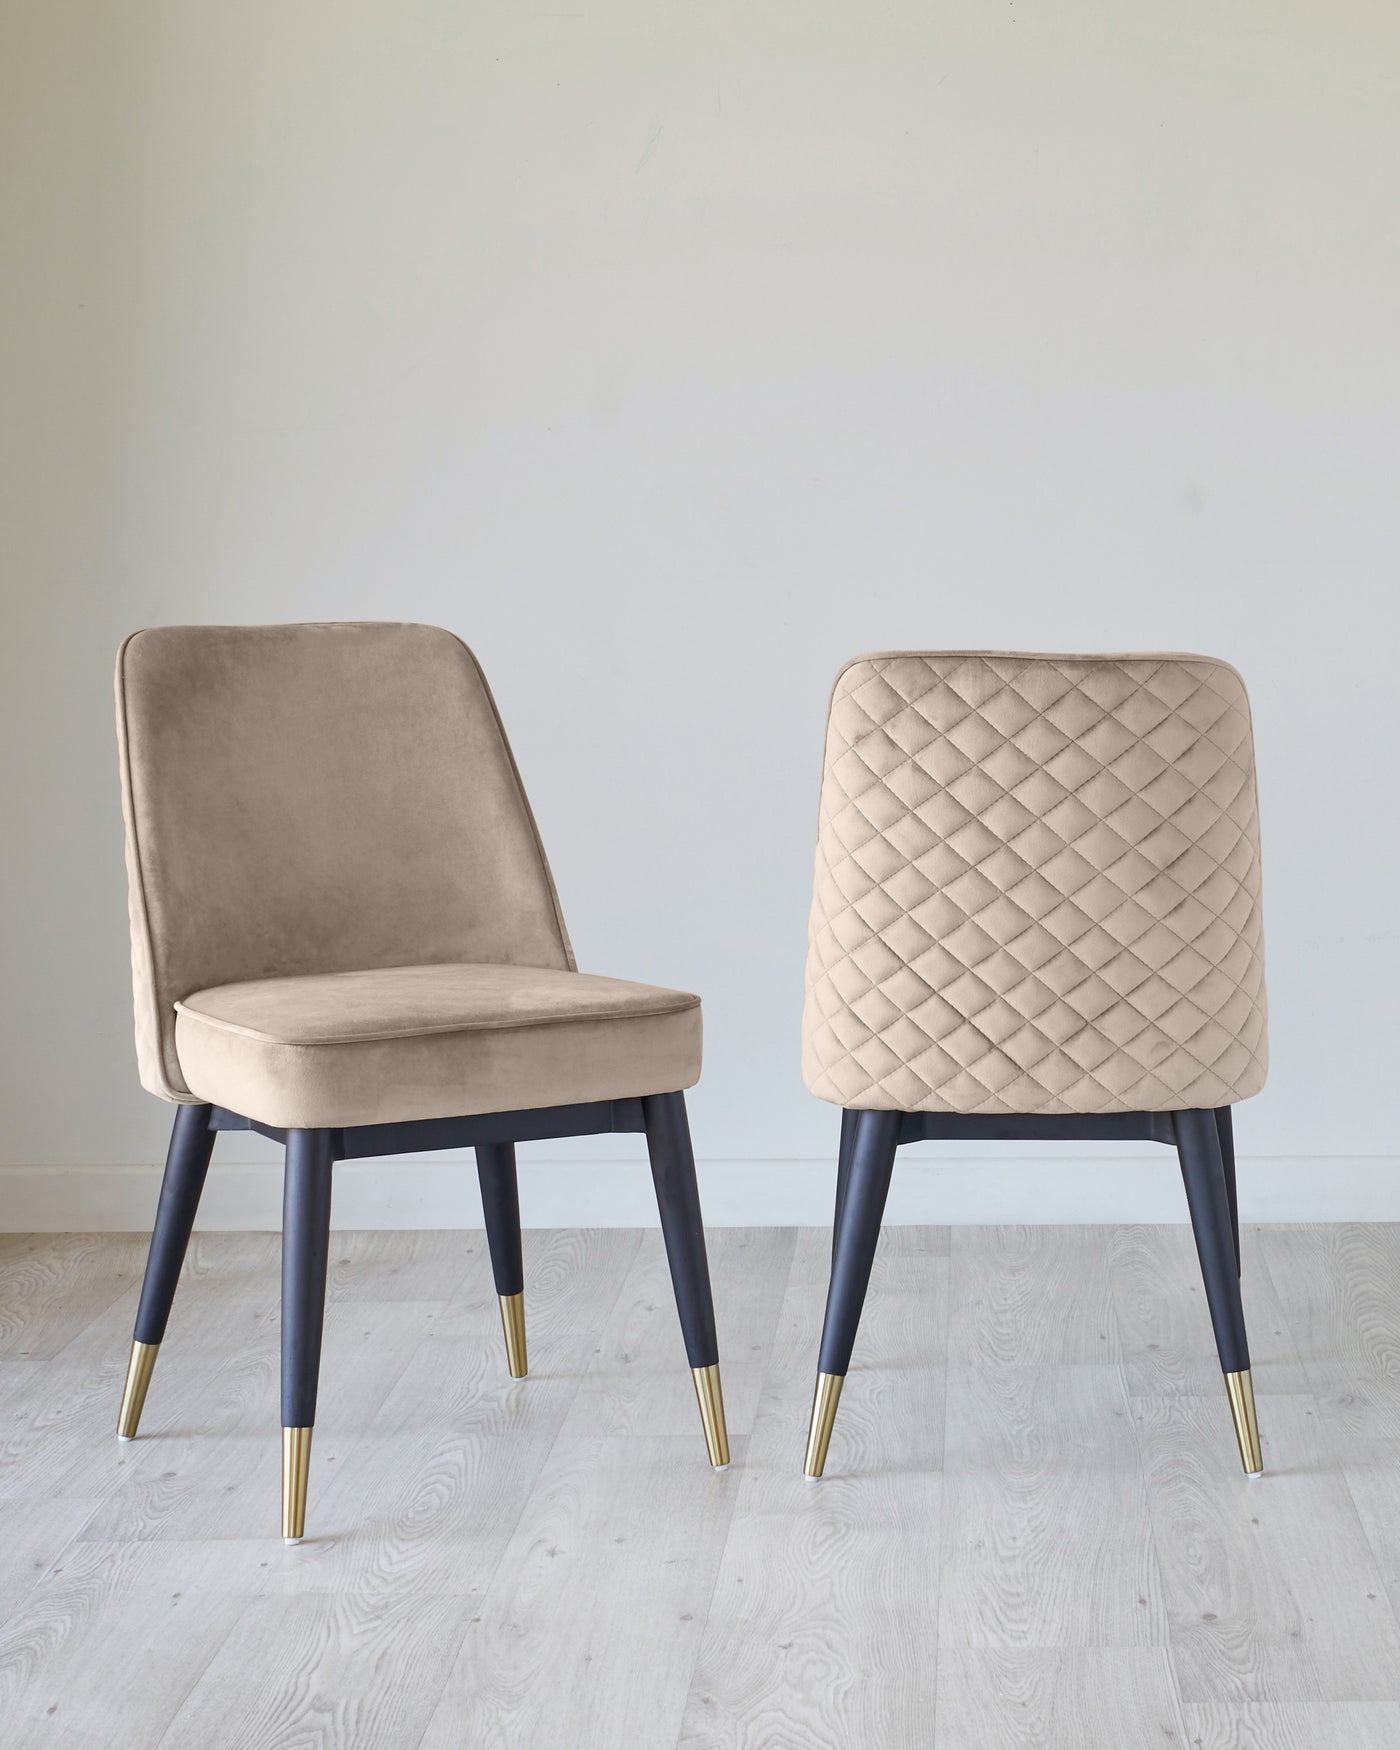 Two modern chairs with elegant design, featuring beige upholstery and dark tapered legs with gold-coloured tips. The chair on the left has a smooth, softly curved backrest, while the chair on the right boasts a textured, diamond-patterned backrest.